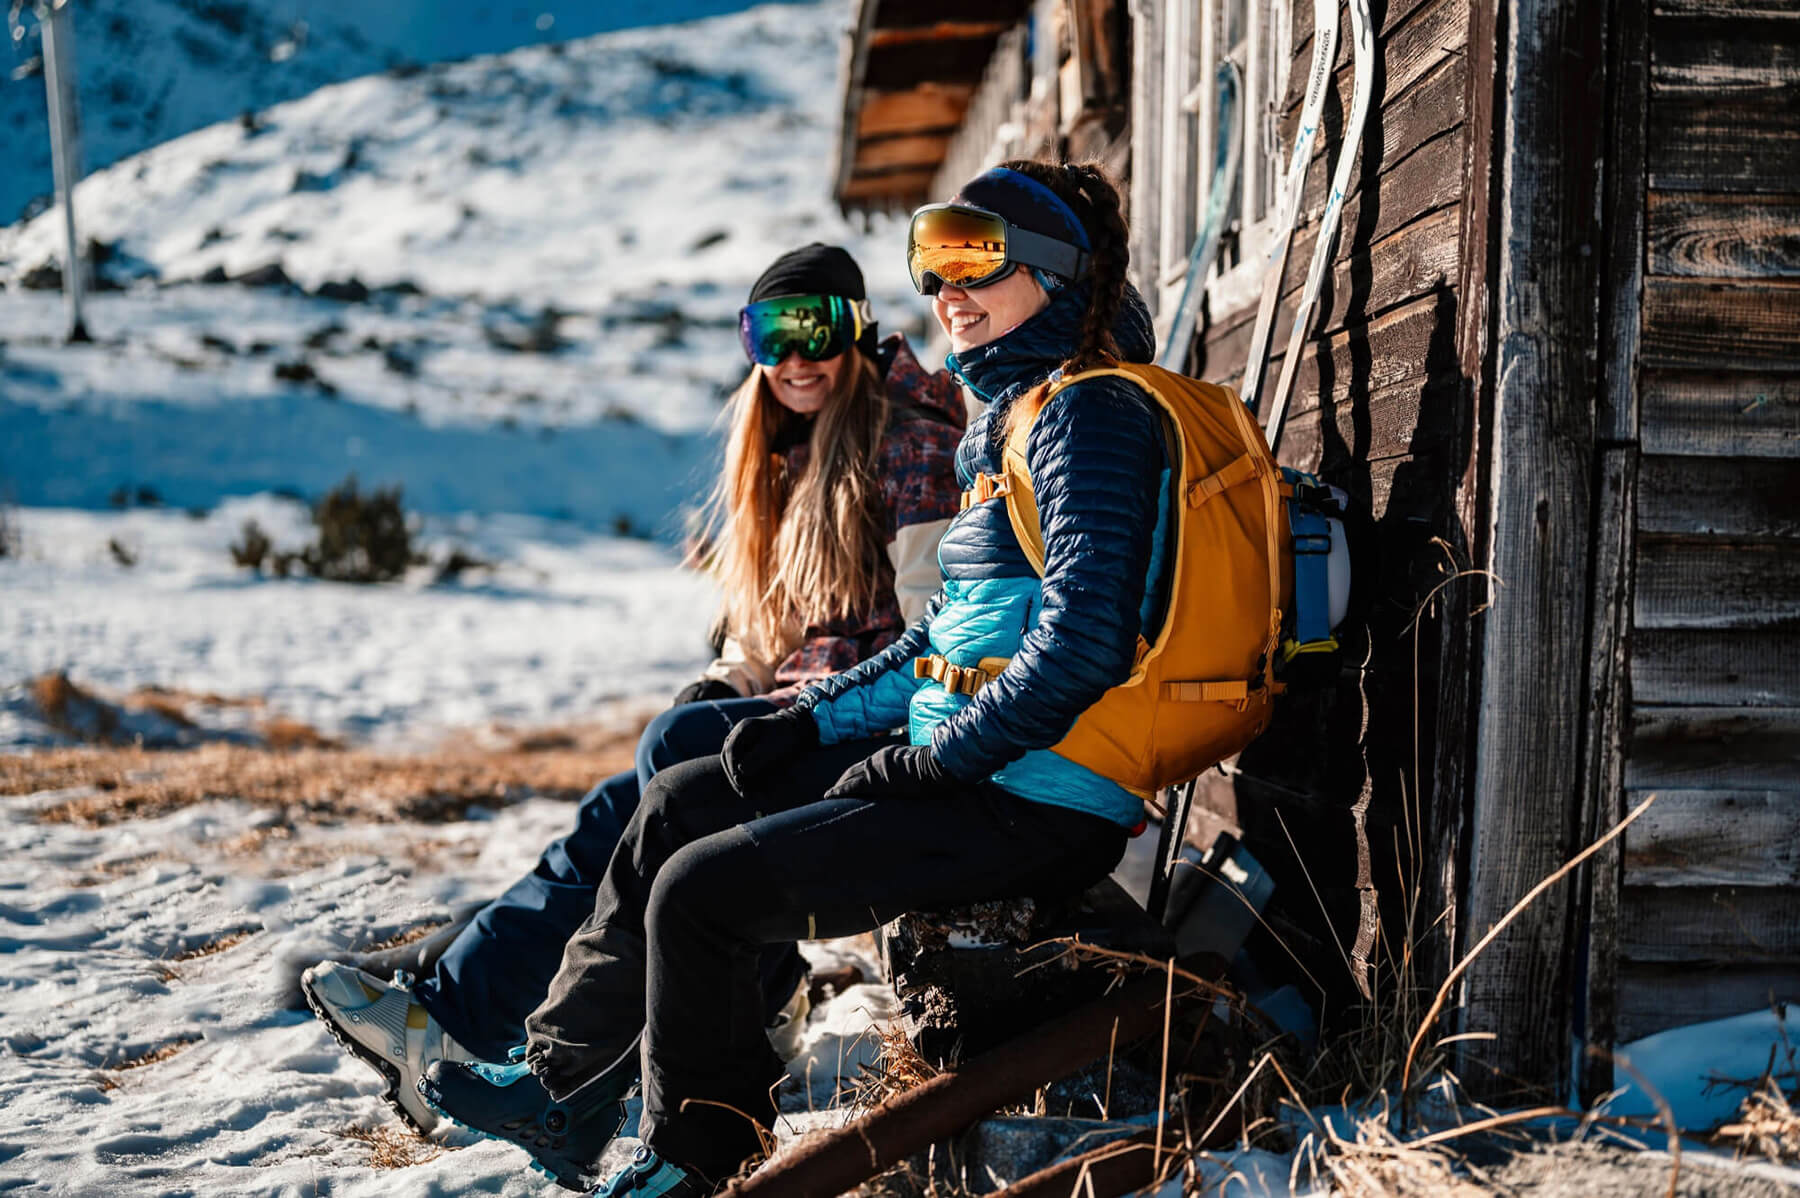 Two ski tourers sit on a bench with skis in the background